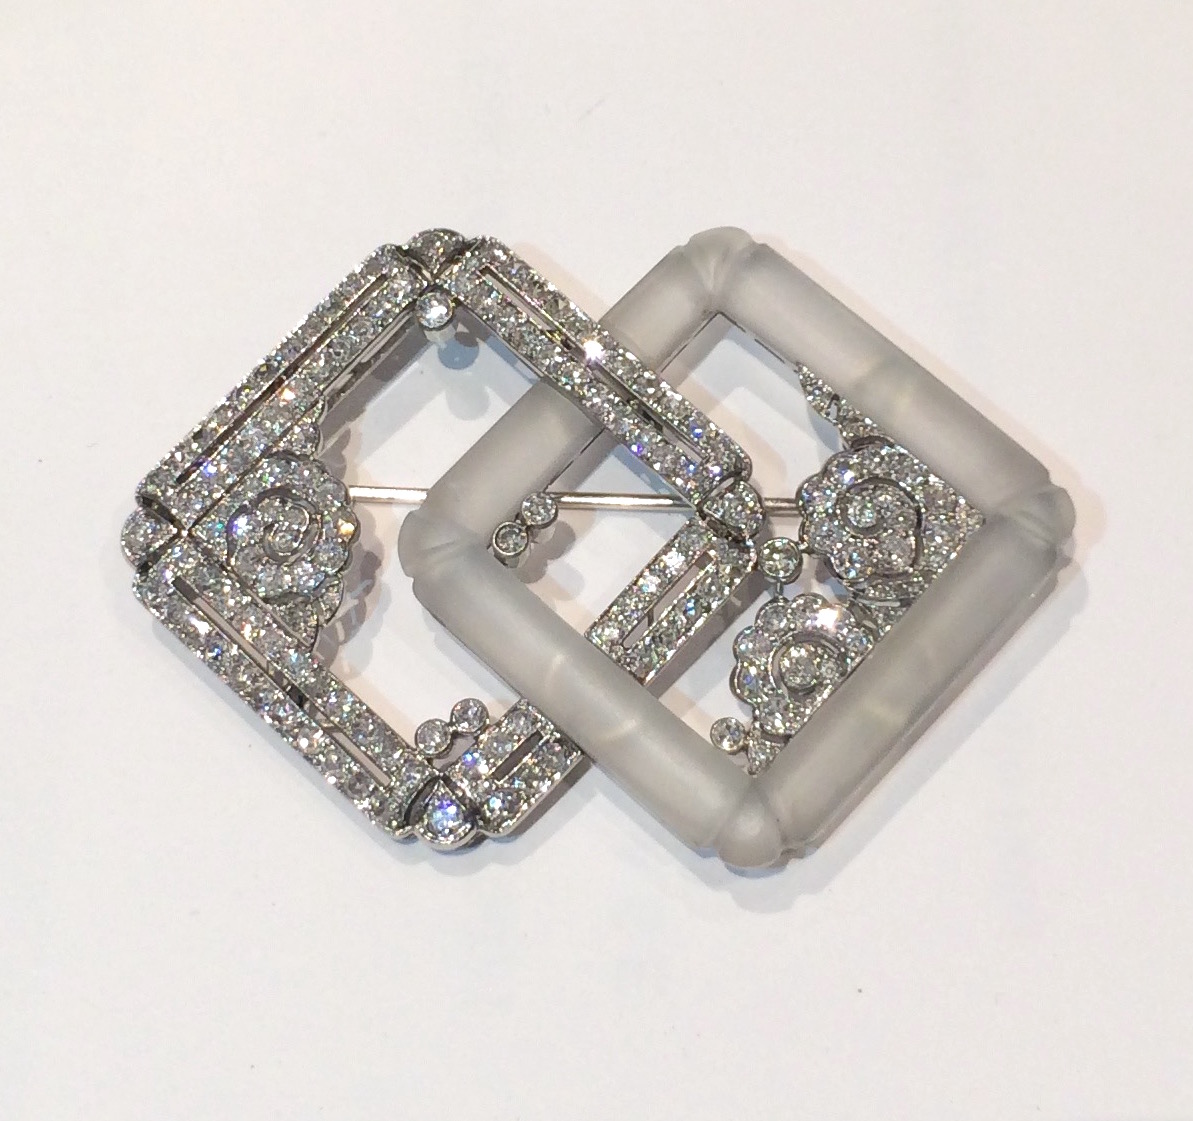 French Art Deco, Fancy “Interlocking Squares” brooch, diamonds and rock crystal set in an openwork platinum mount, marked, c. 1920’s